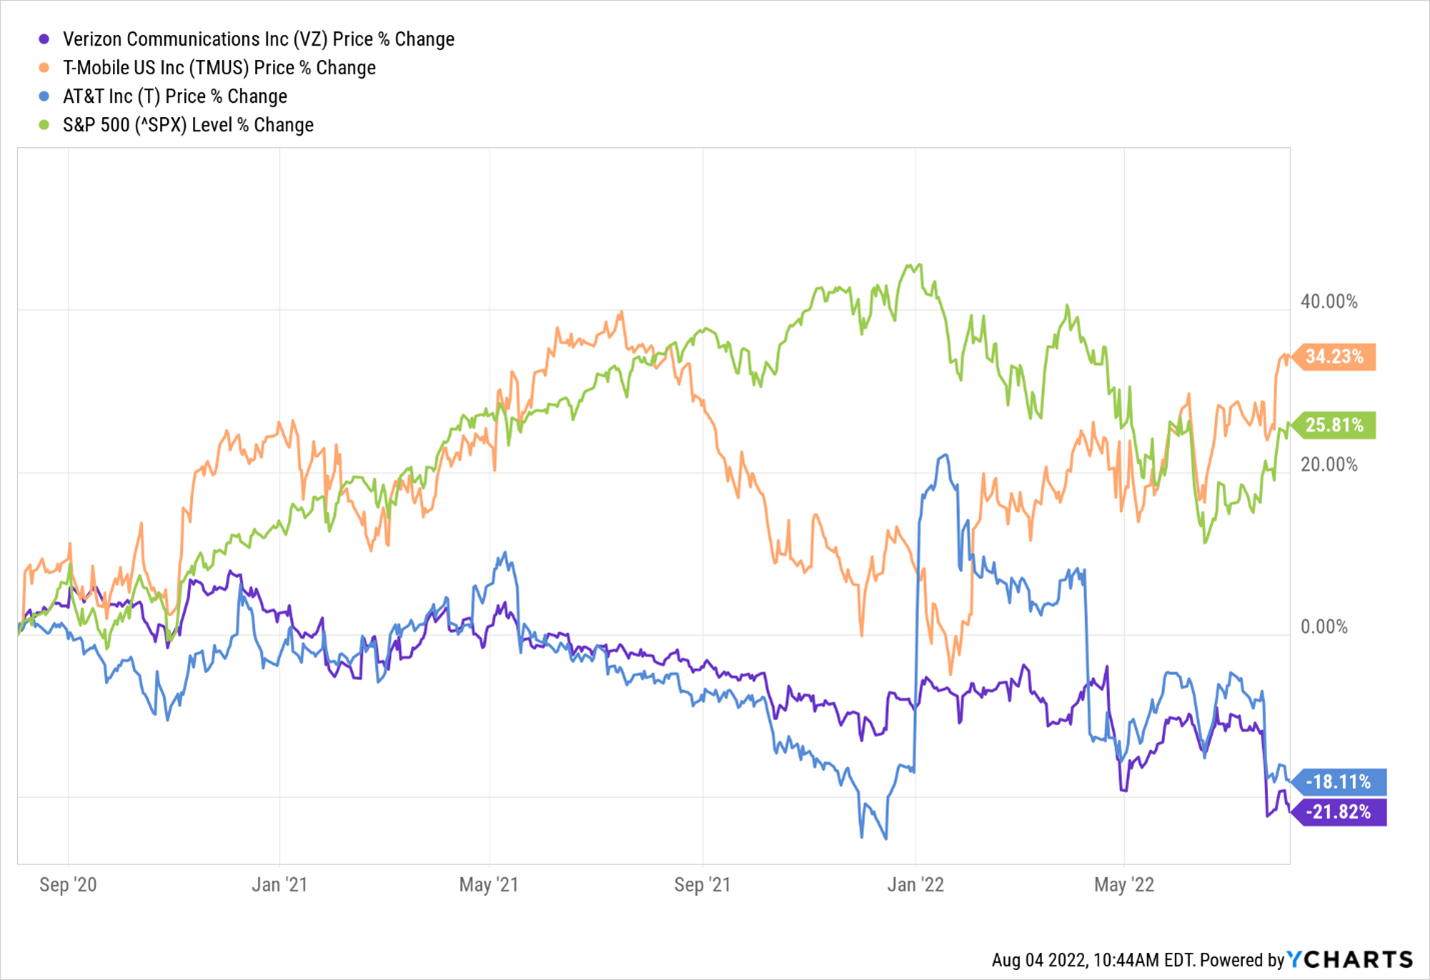 a chart depicting Verizon's price % change, T-Mobile's price % change, AT&T's price % change, and the S&P 500 price % change from Sept. 2020 to July 2022